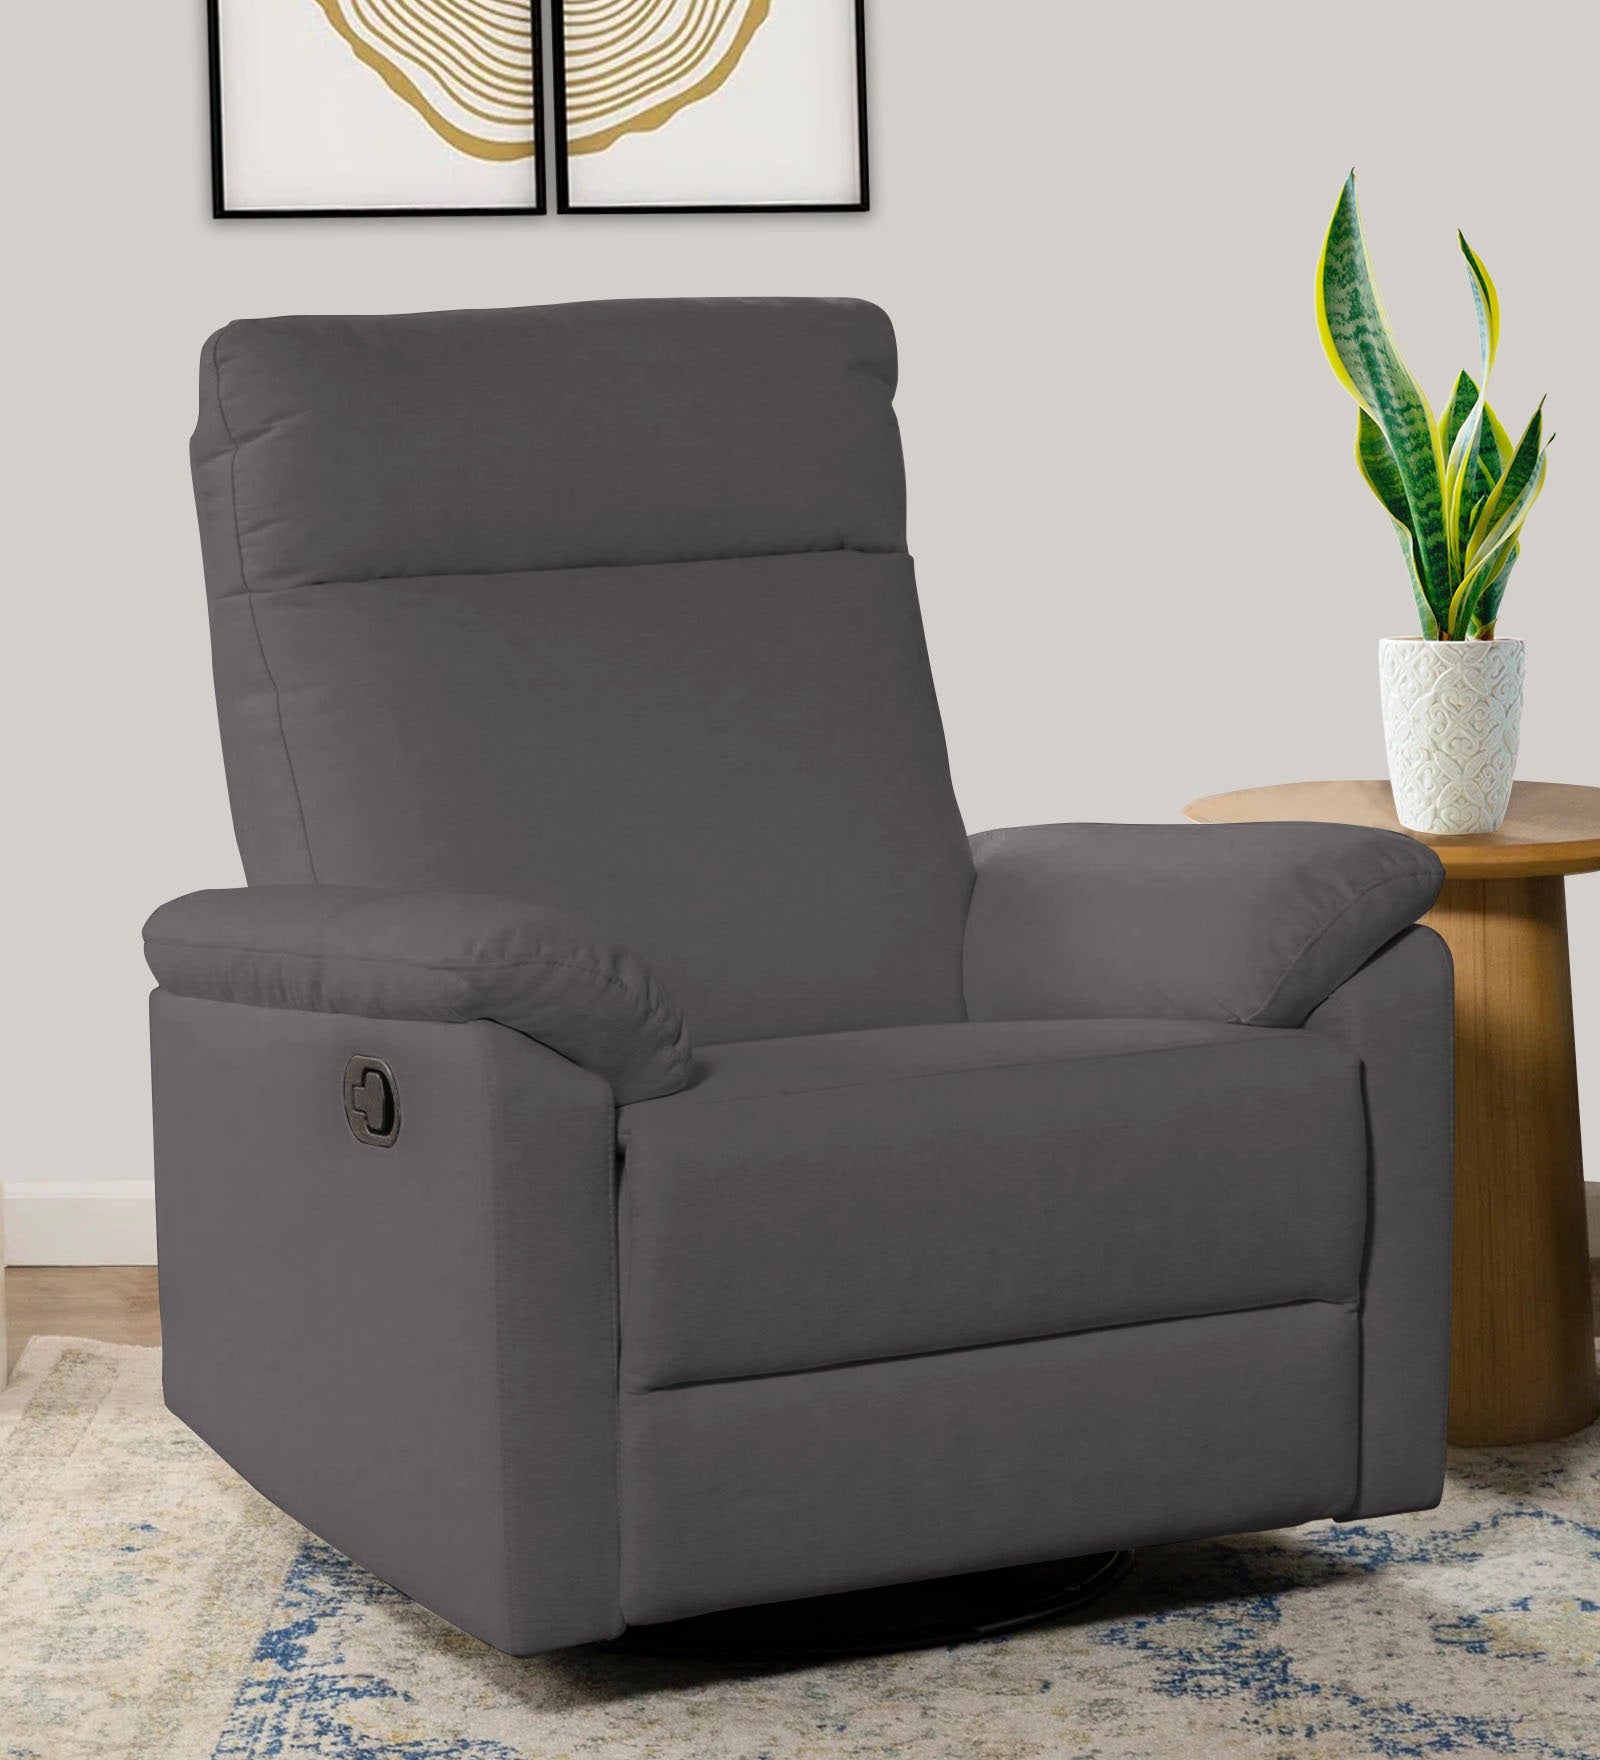 Mandy Fabric Manual 1 Seater Recliner In Davy Grey Colour